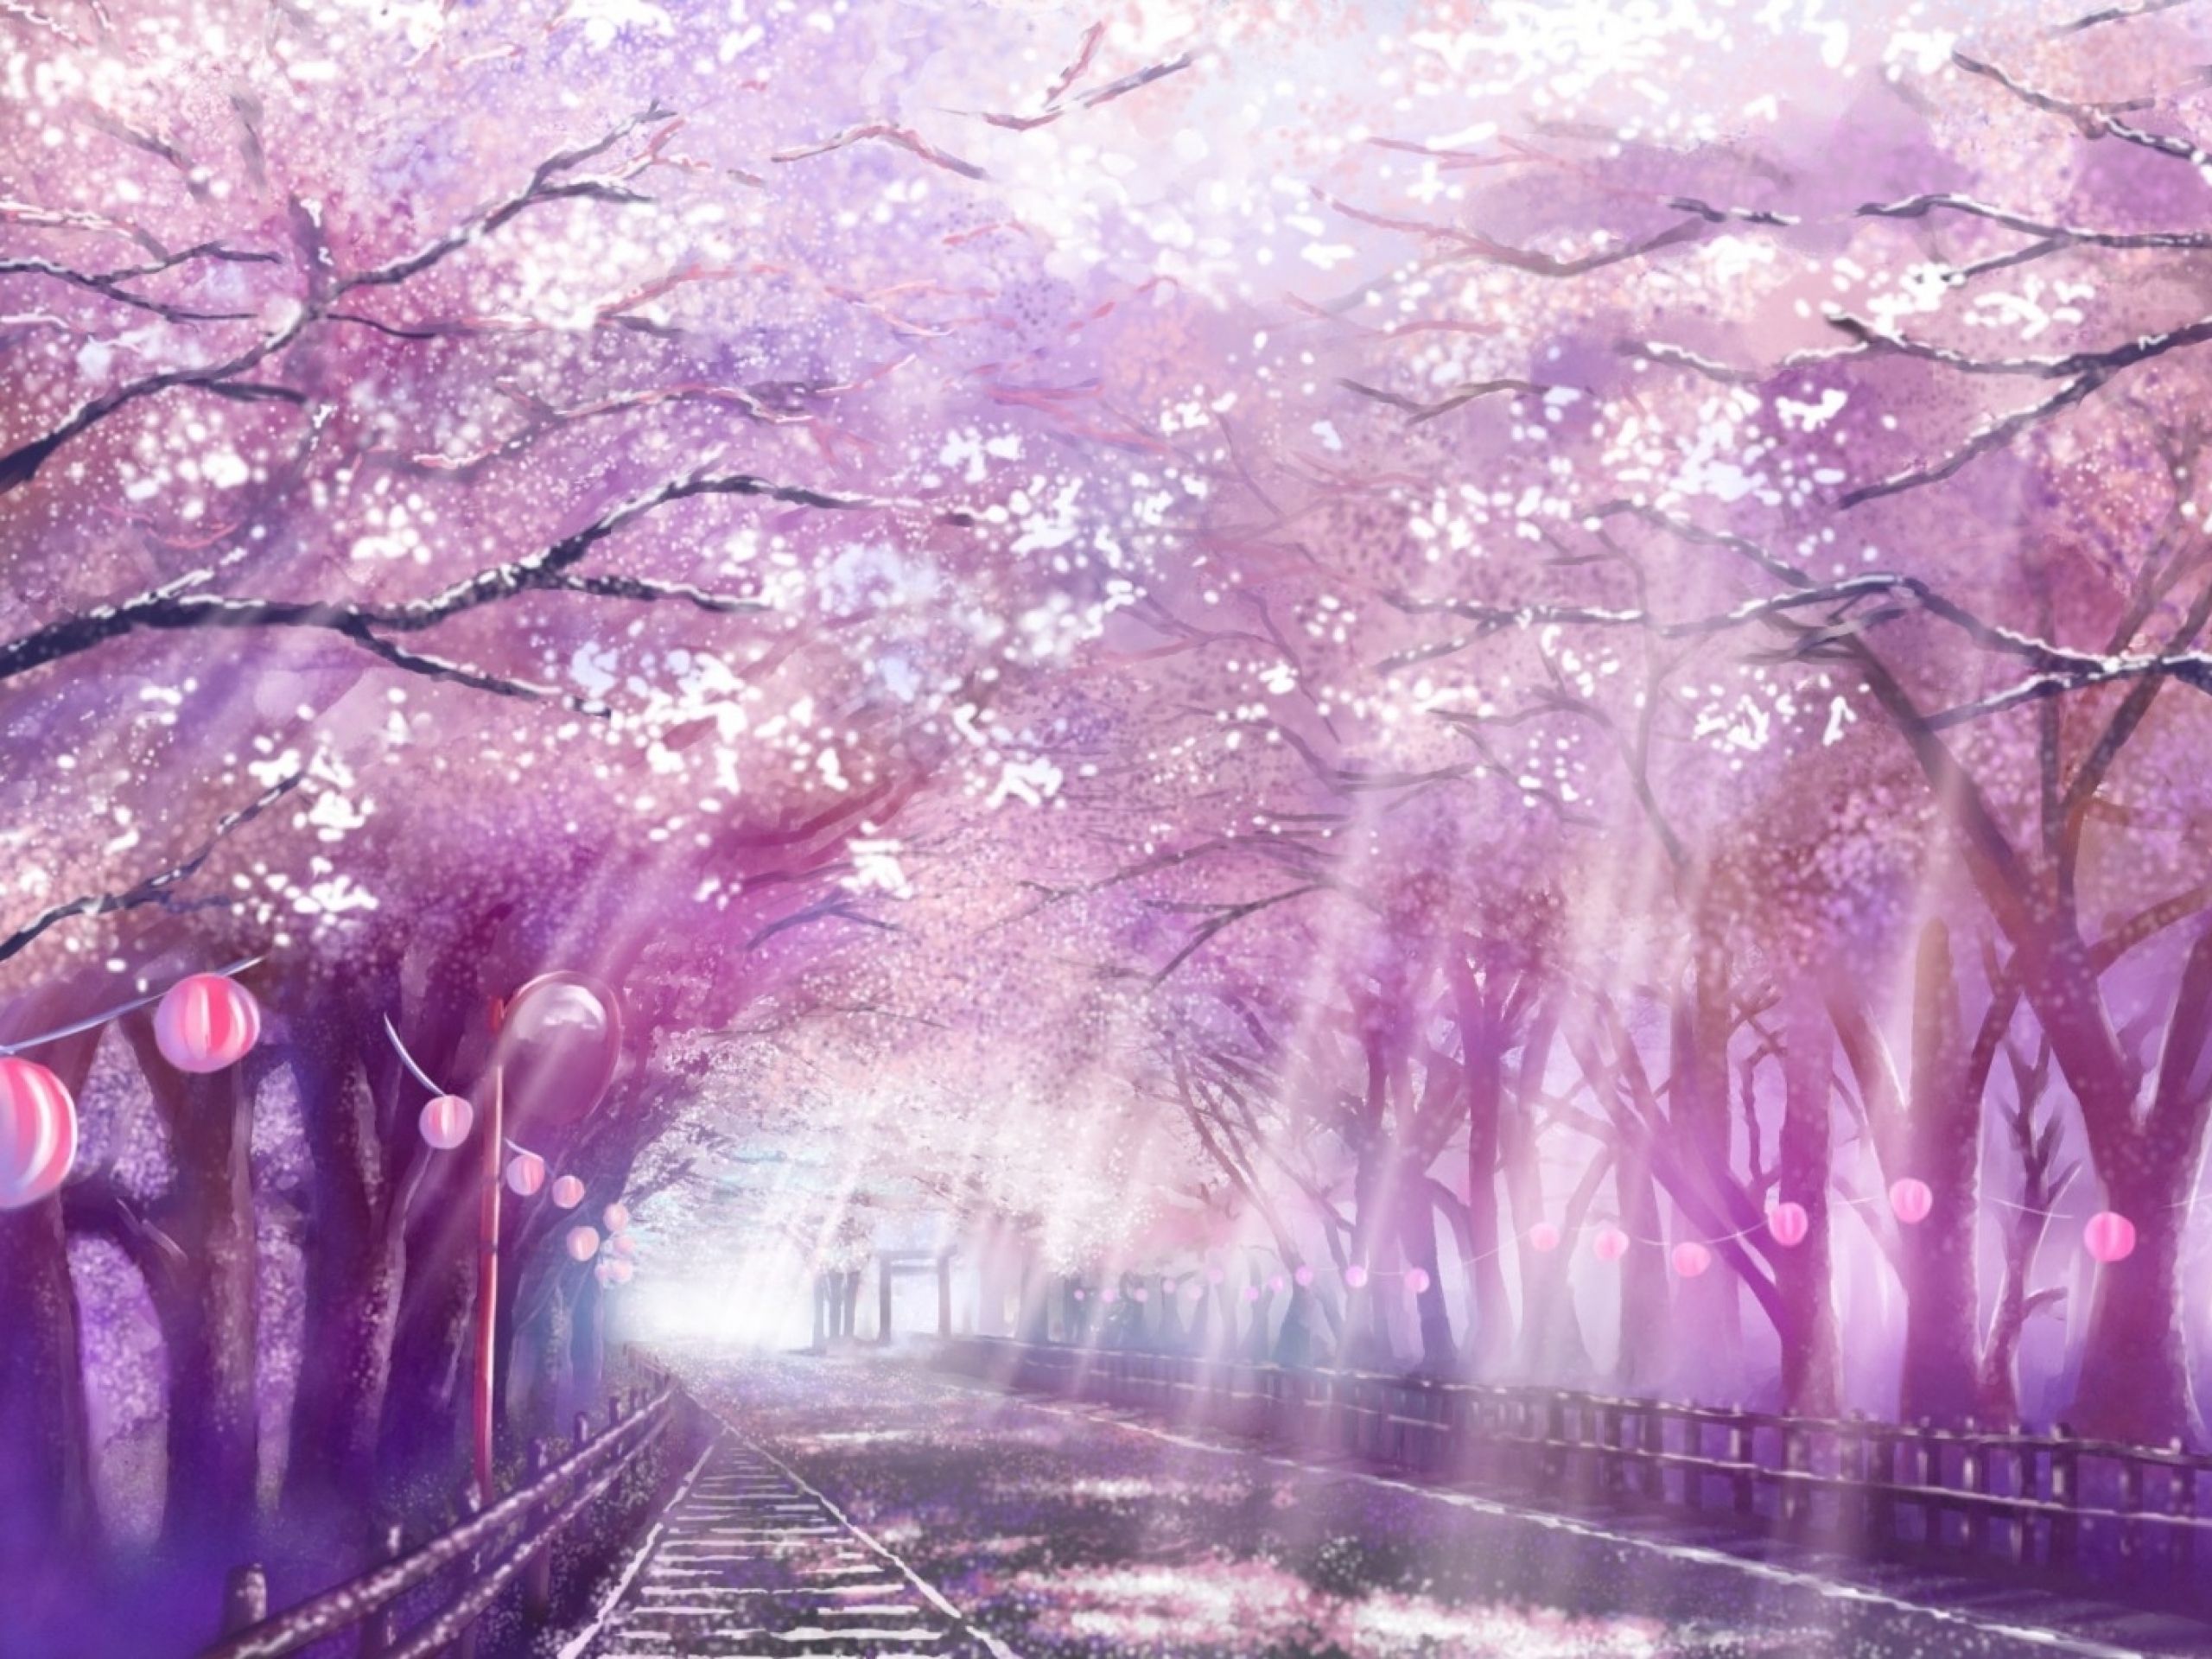 Your Lie In April Background